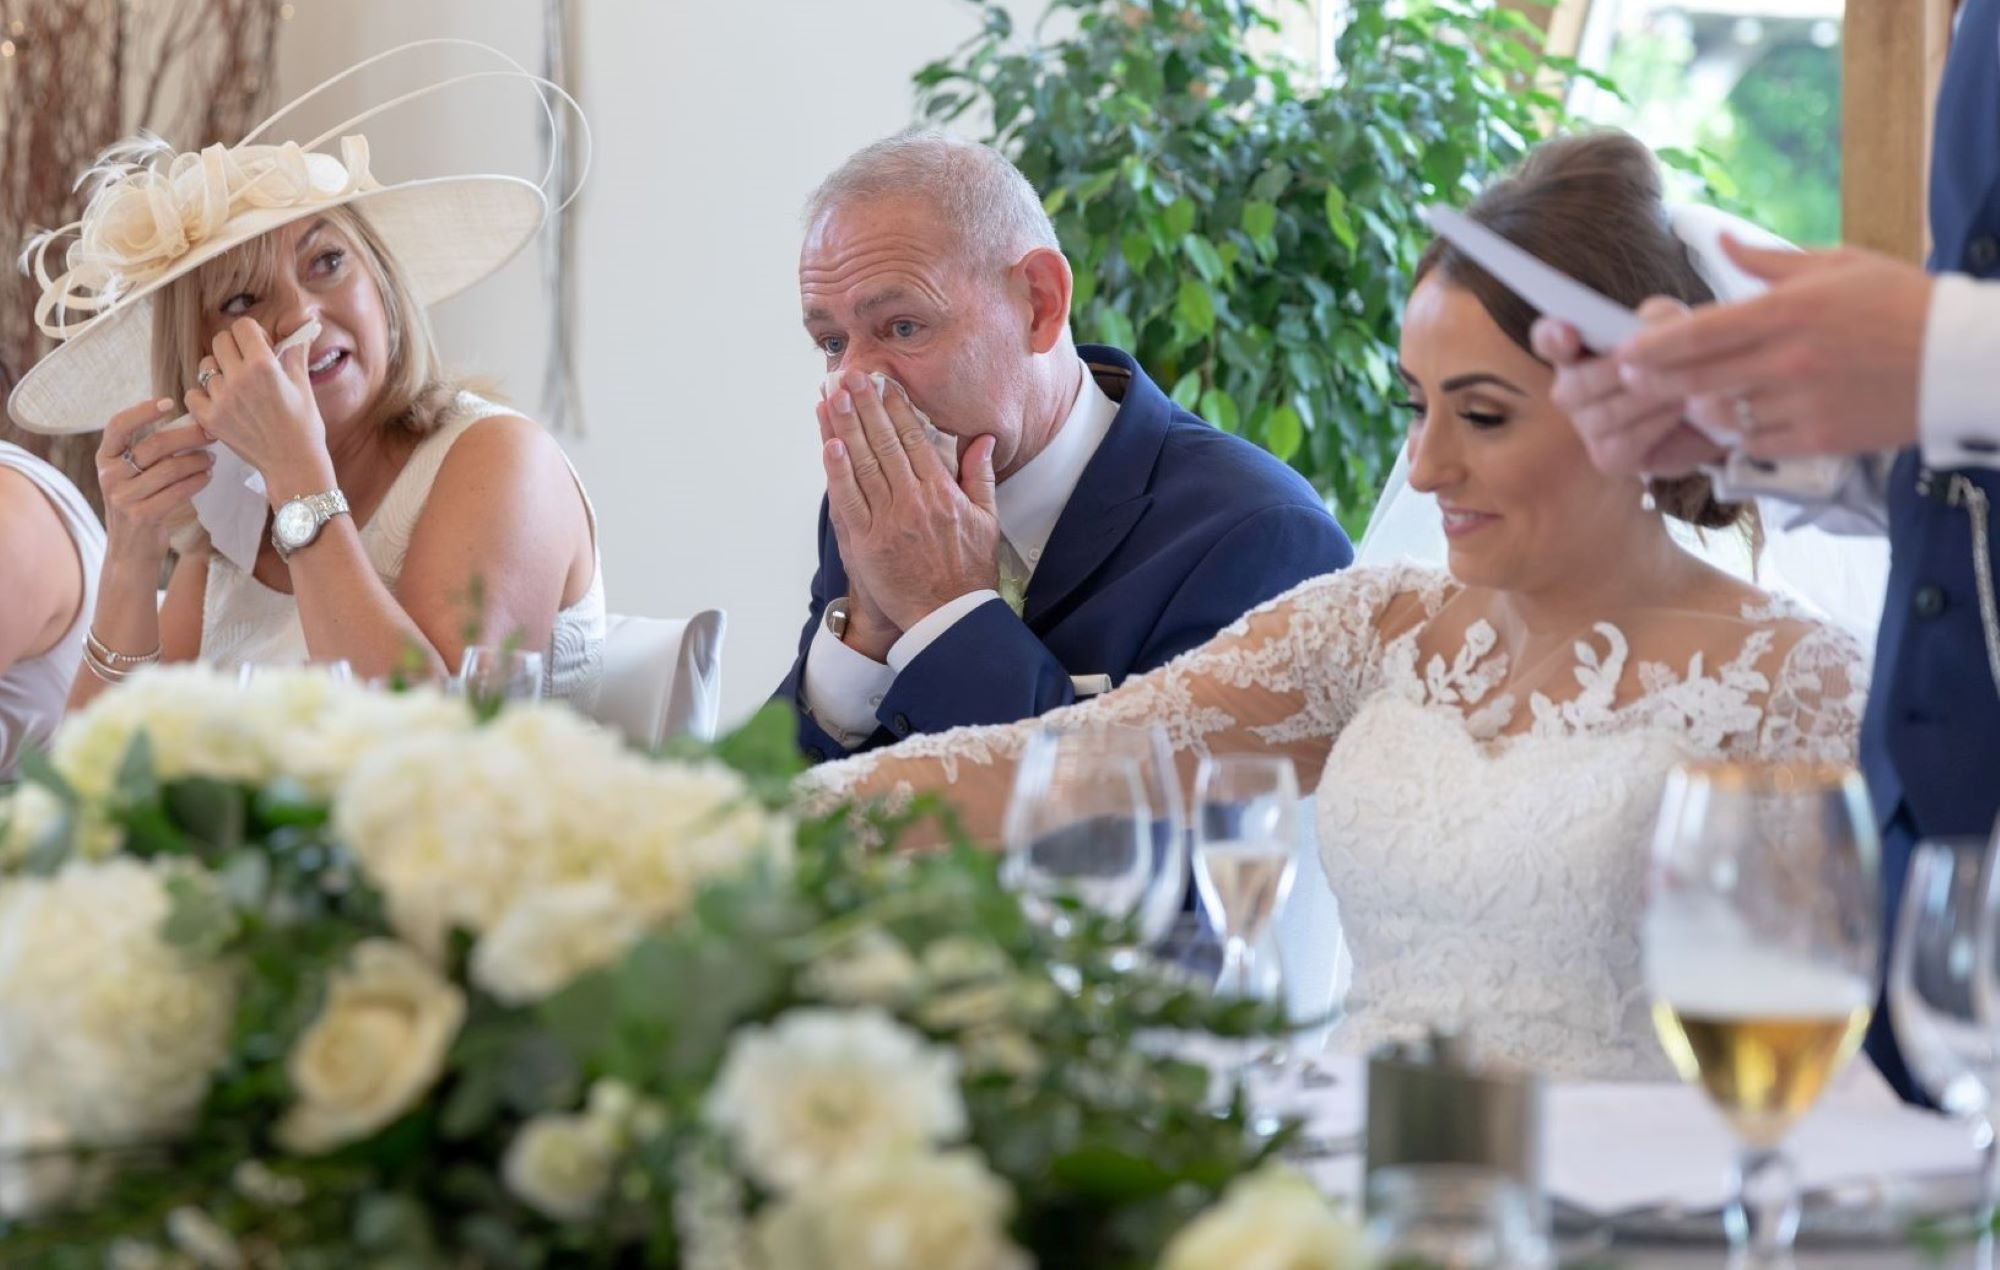 13 tearful mother and father of the bride dinner reception mythe barn luxury venue leicestershire oxfordshire wedding photography